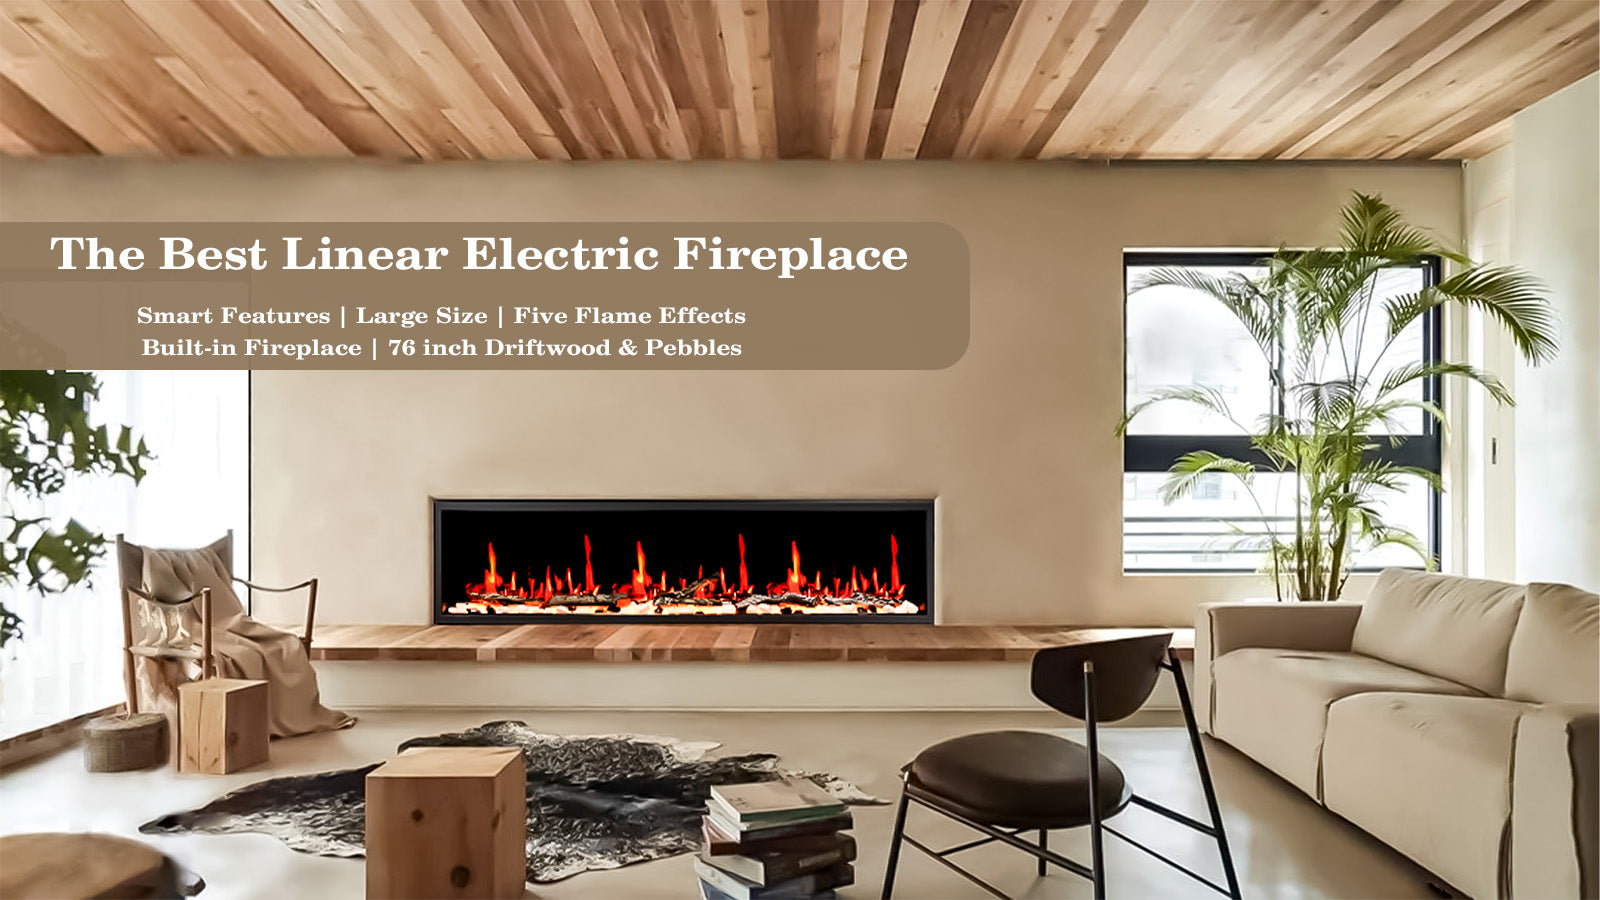 Zopflame 76 inch built-in linear electric fireplace for living room